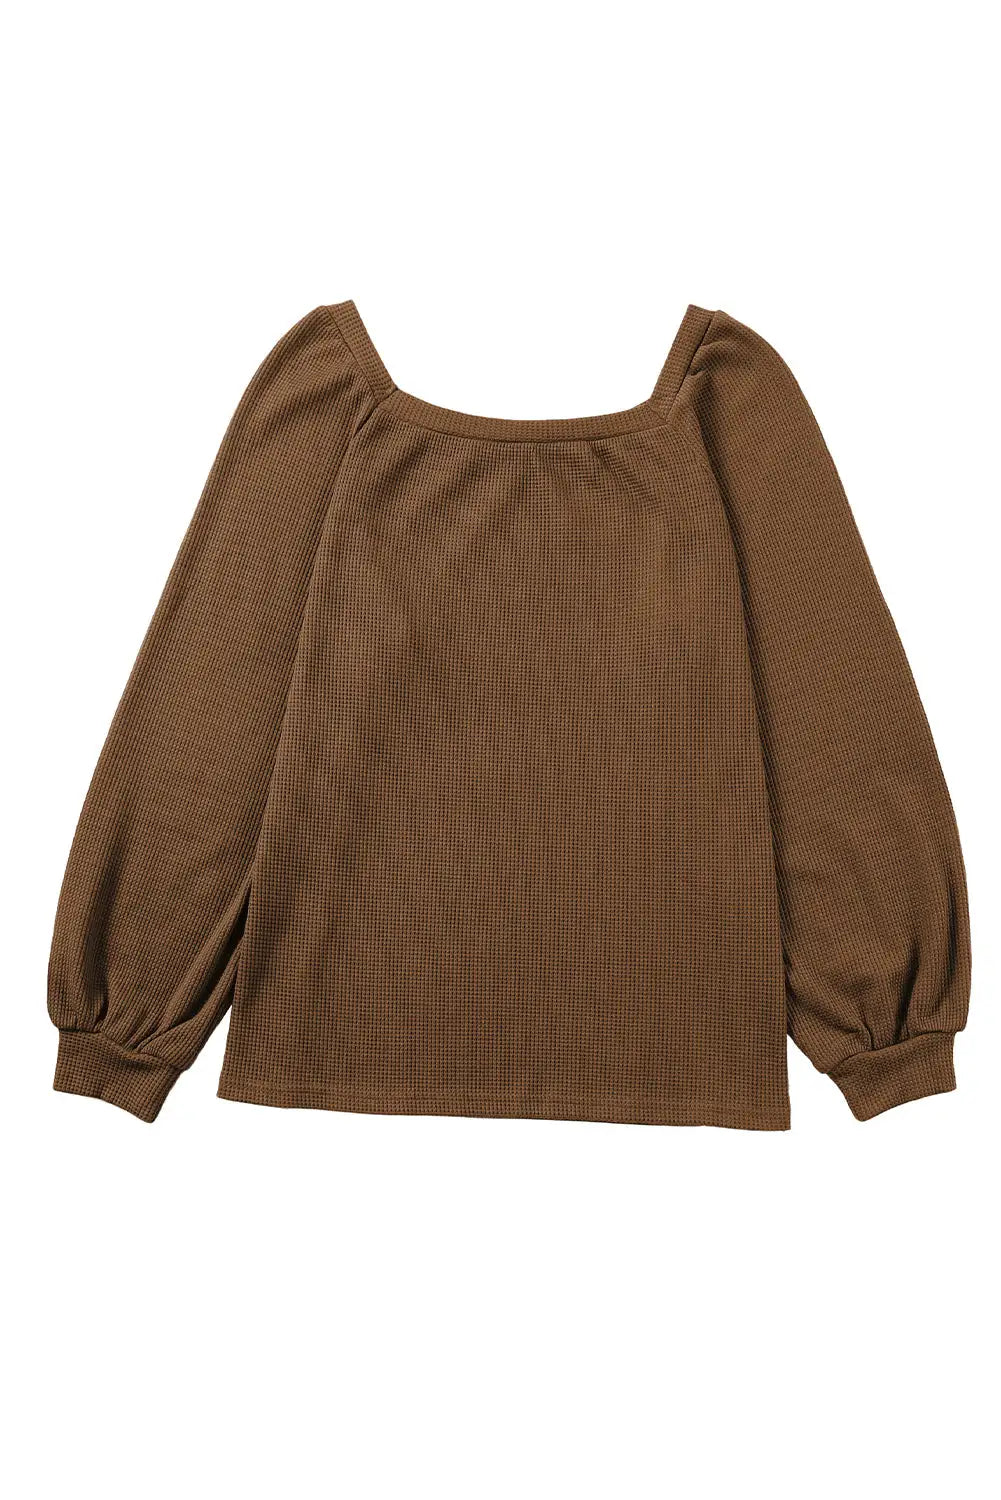 Green scoop neck puff sleeve waffle knit top - long tops